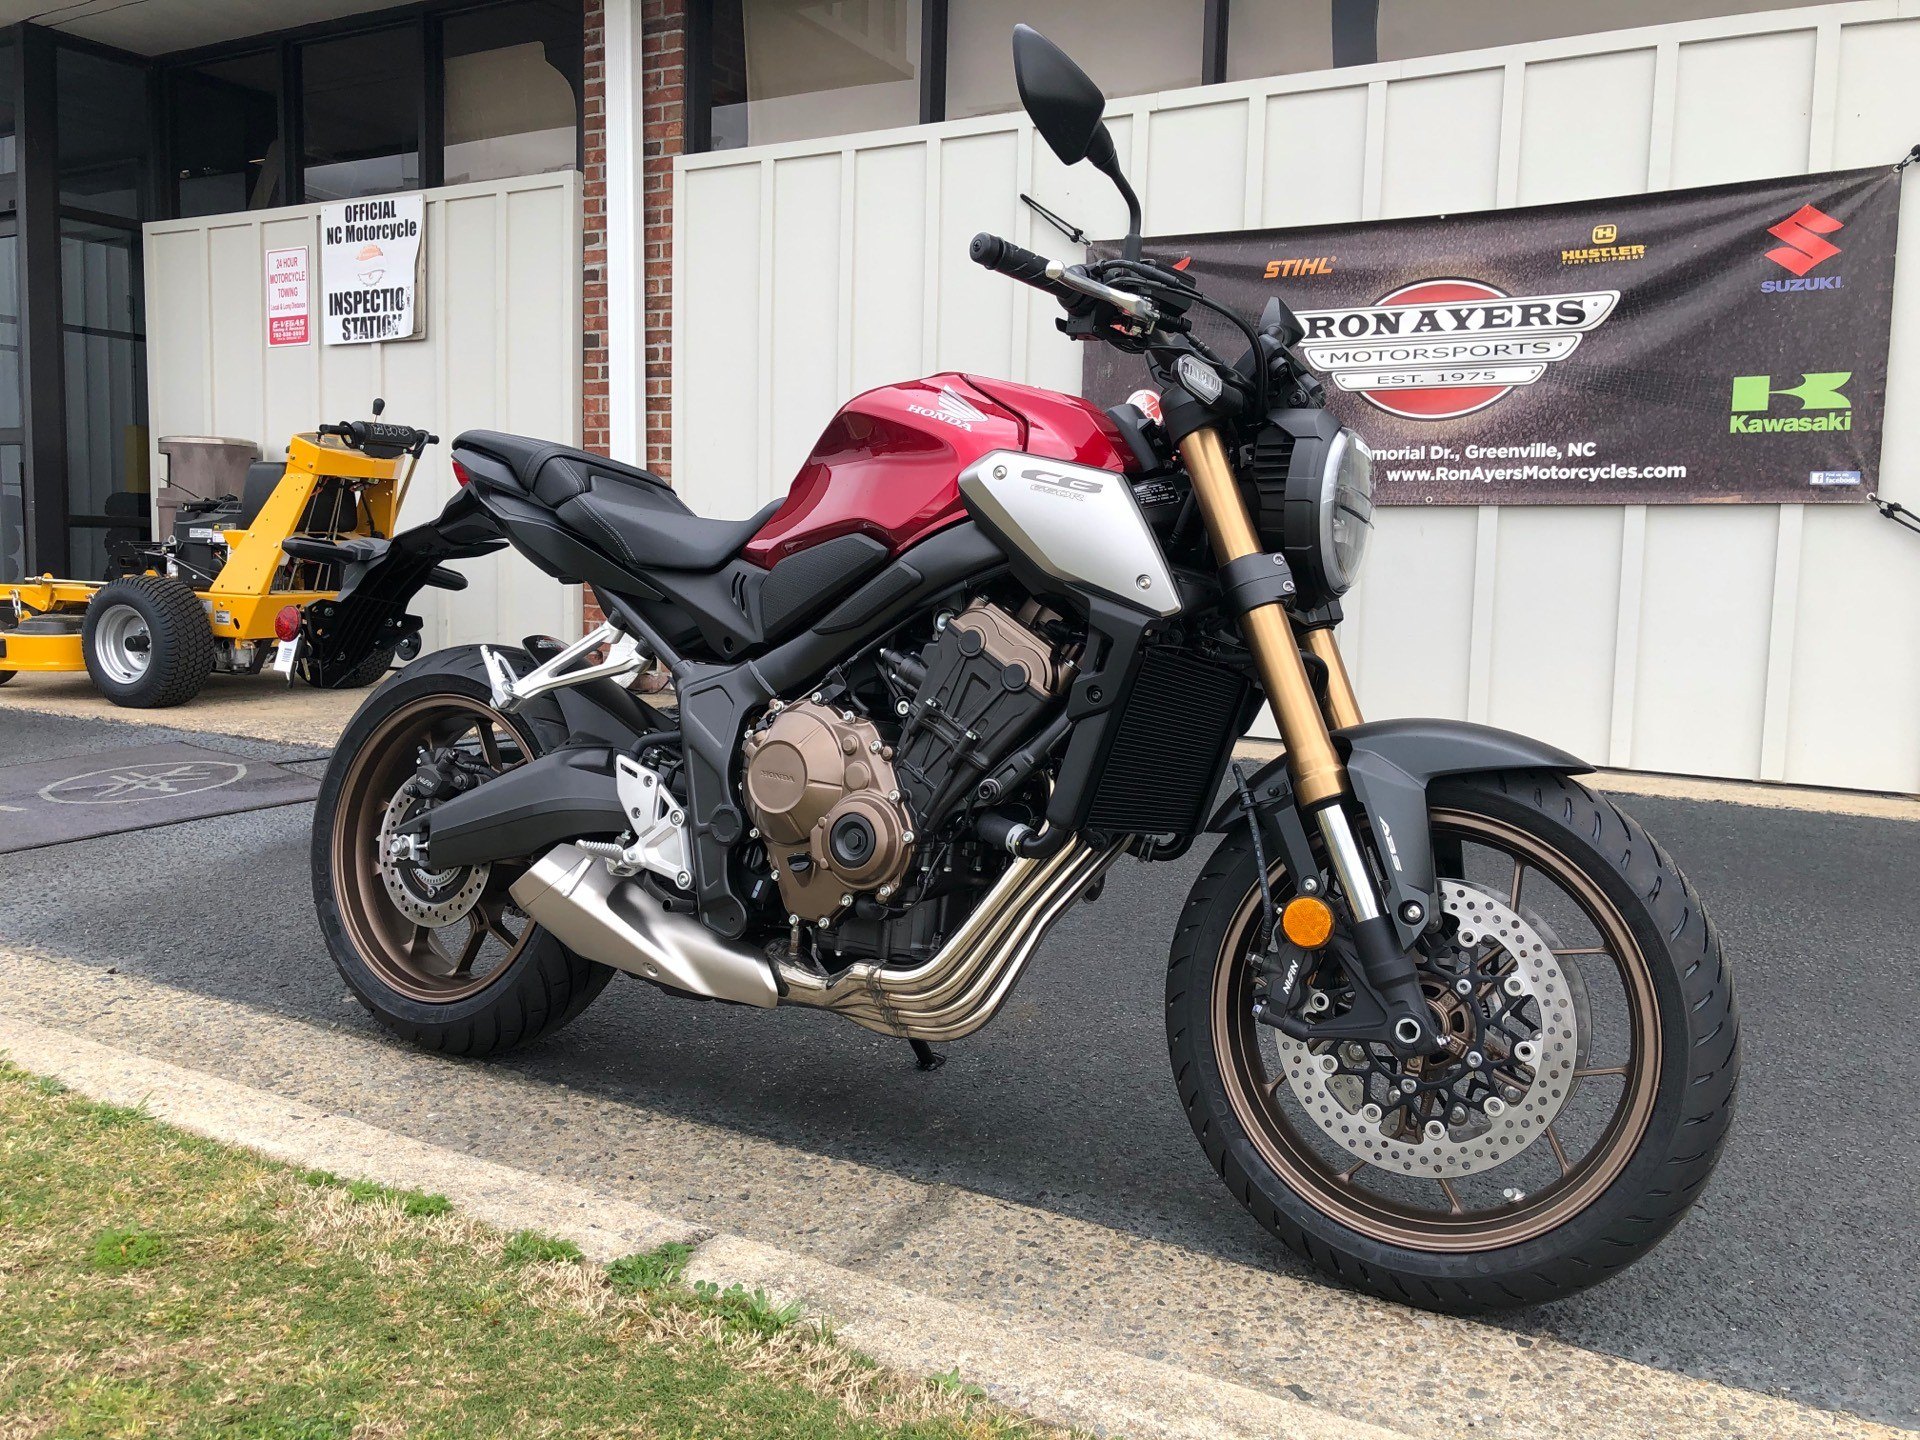 New 2020 Honda CB650R ABS Motorcycles in Greenville, NC | Stock Number: N/A